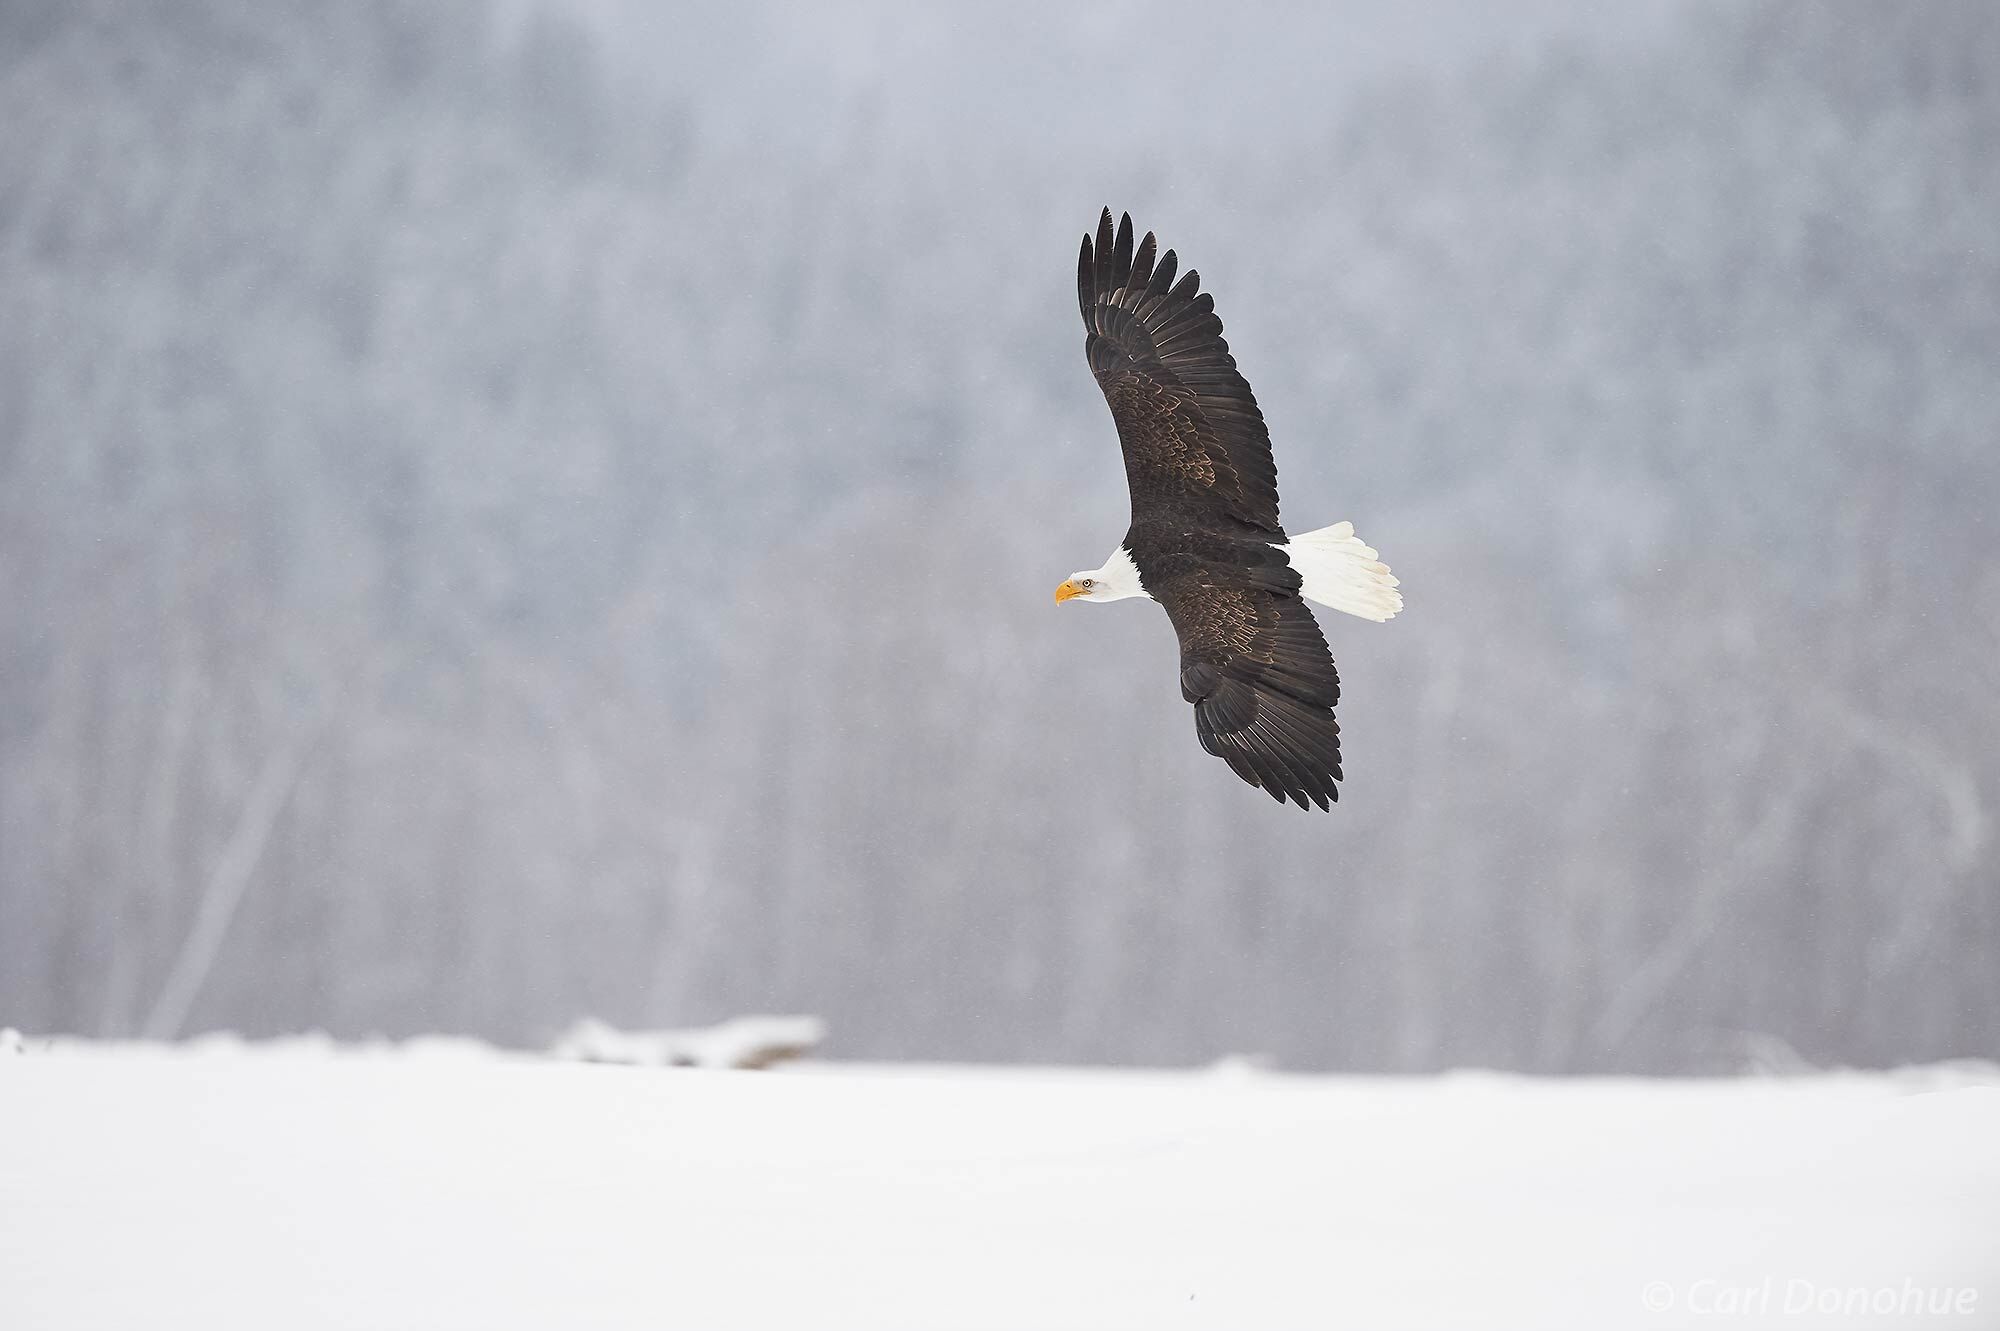 Soaring against a snow-covered mountain backdrop, a majestic adult bald eagle in flight is a wonderful scene.  The Chilkat Bald...